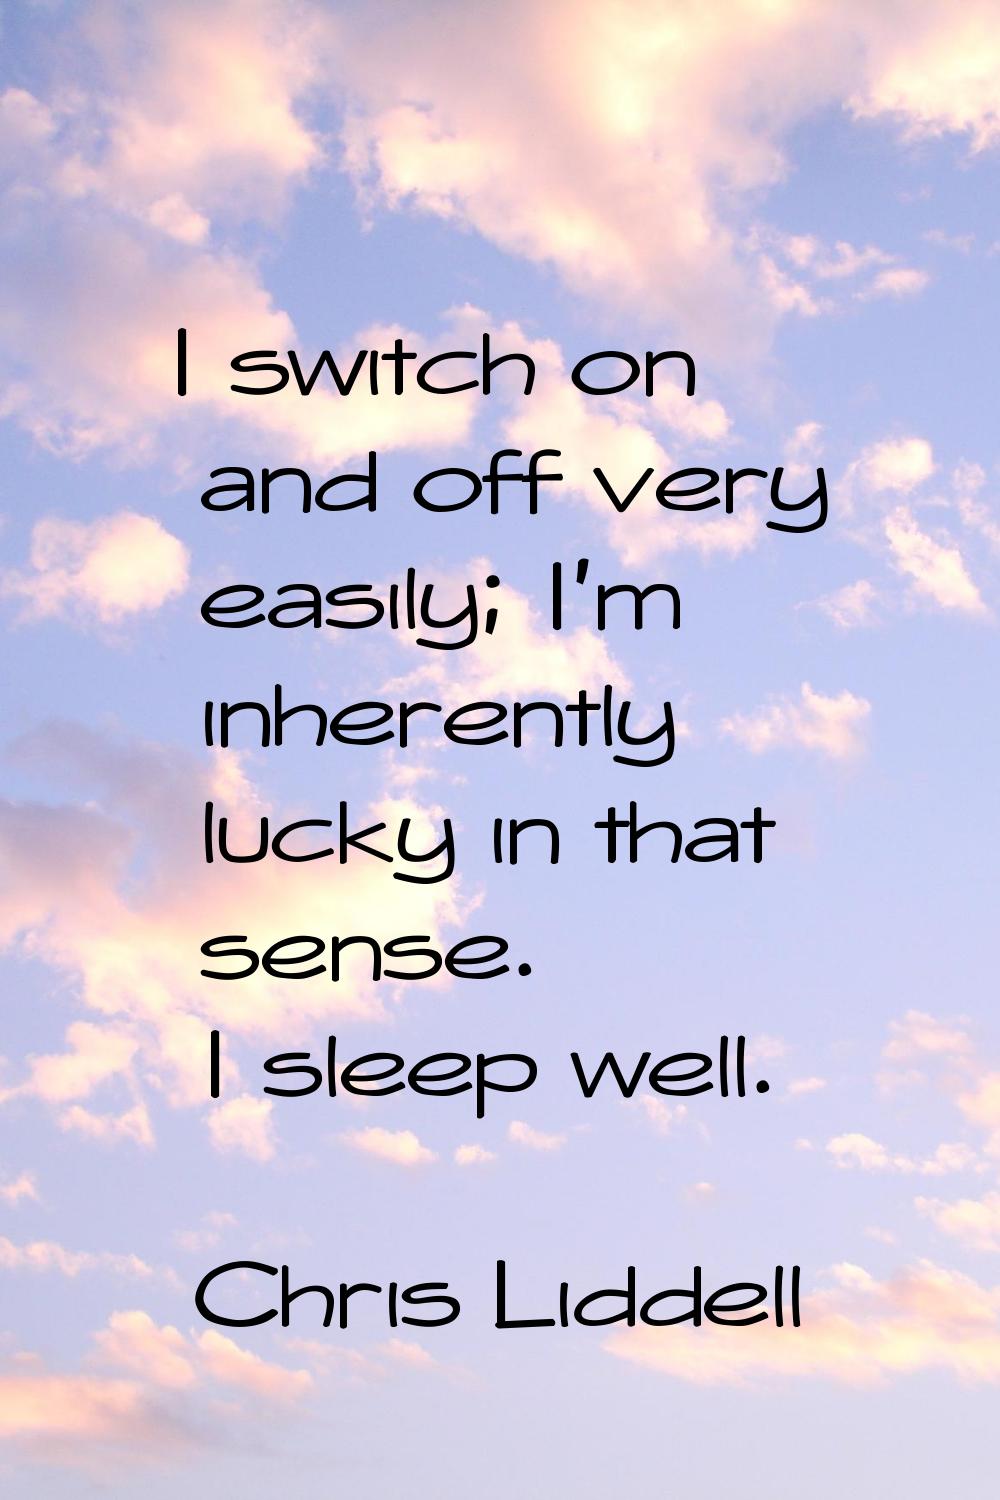 I switch on and off very easily; I'm inherently lucky in that sense. I sleep well.